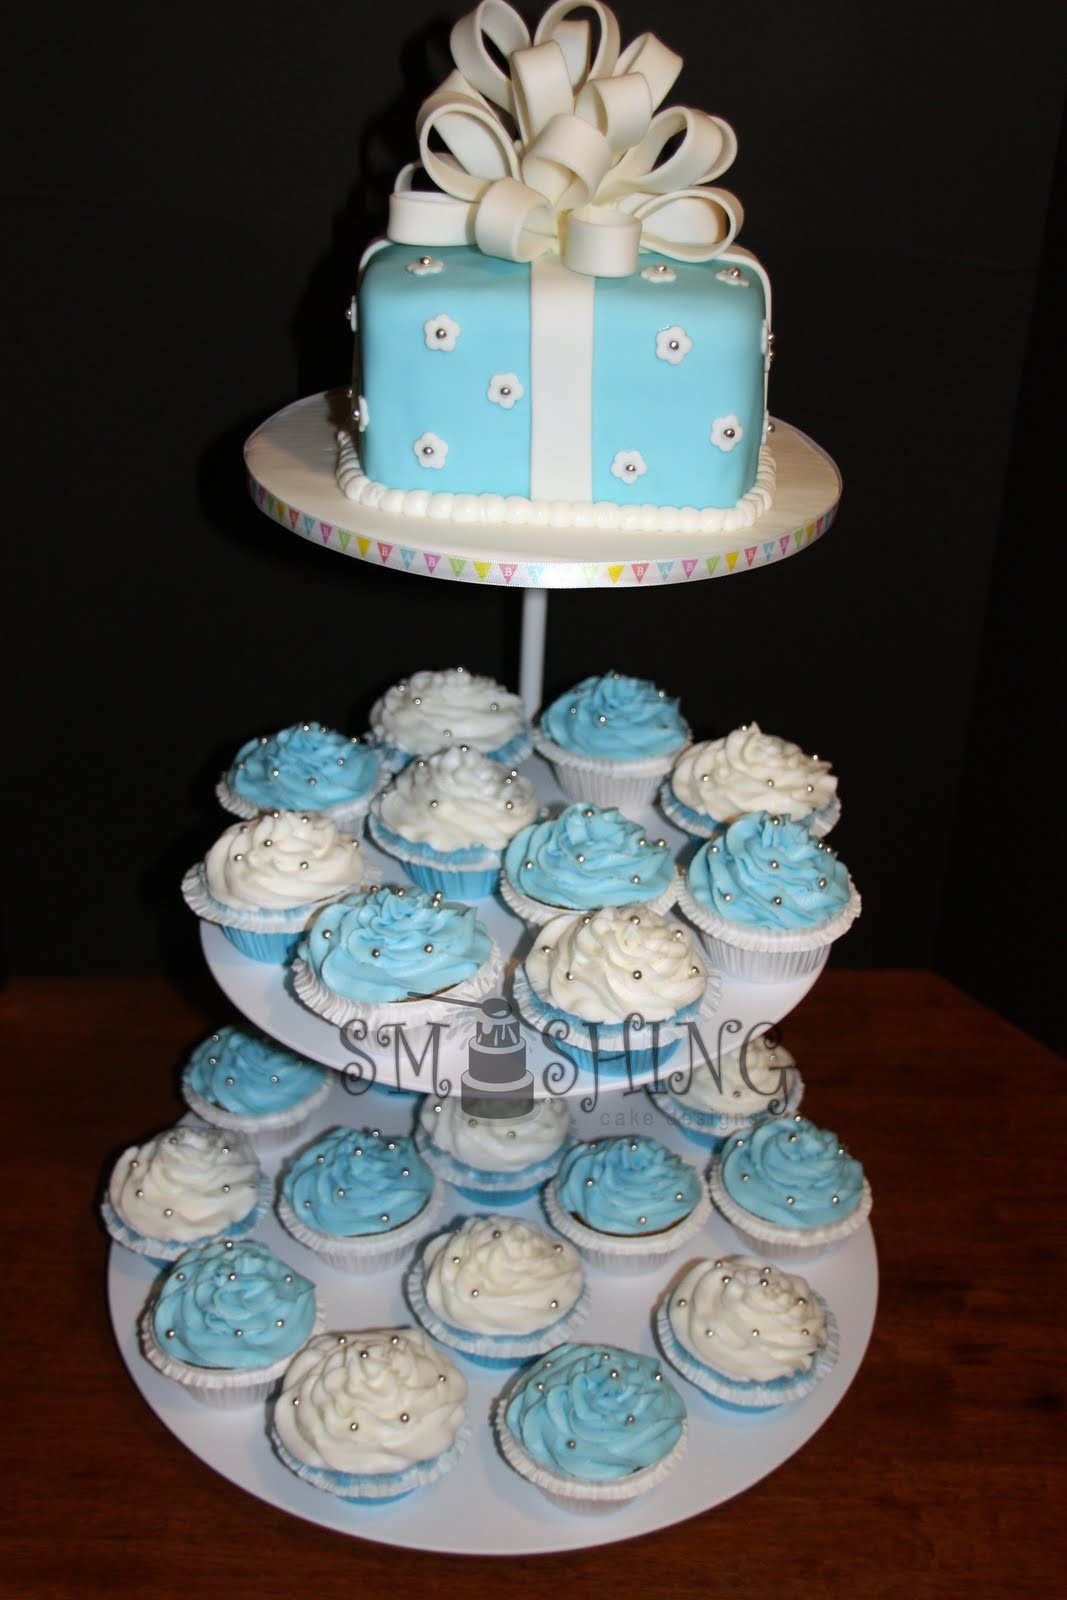 The Best 15 Baby Shower Cake and Cupcakes